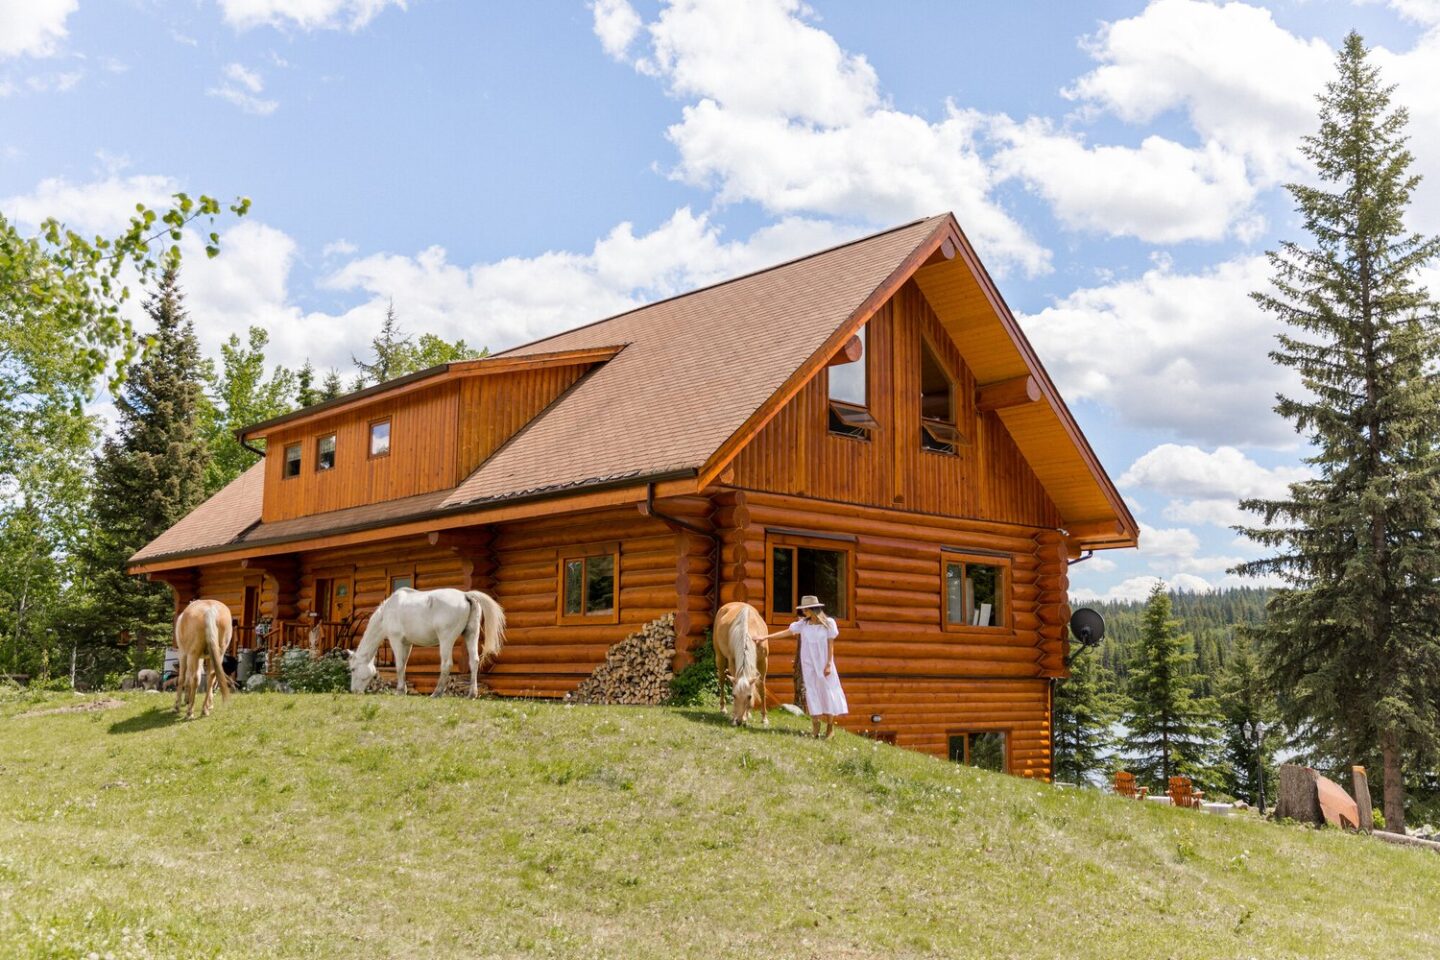 Cabin with a horse in front of it.